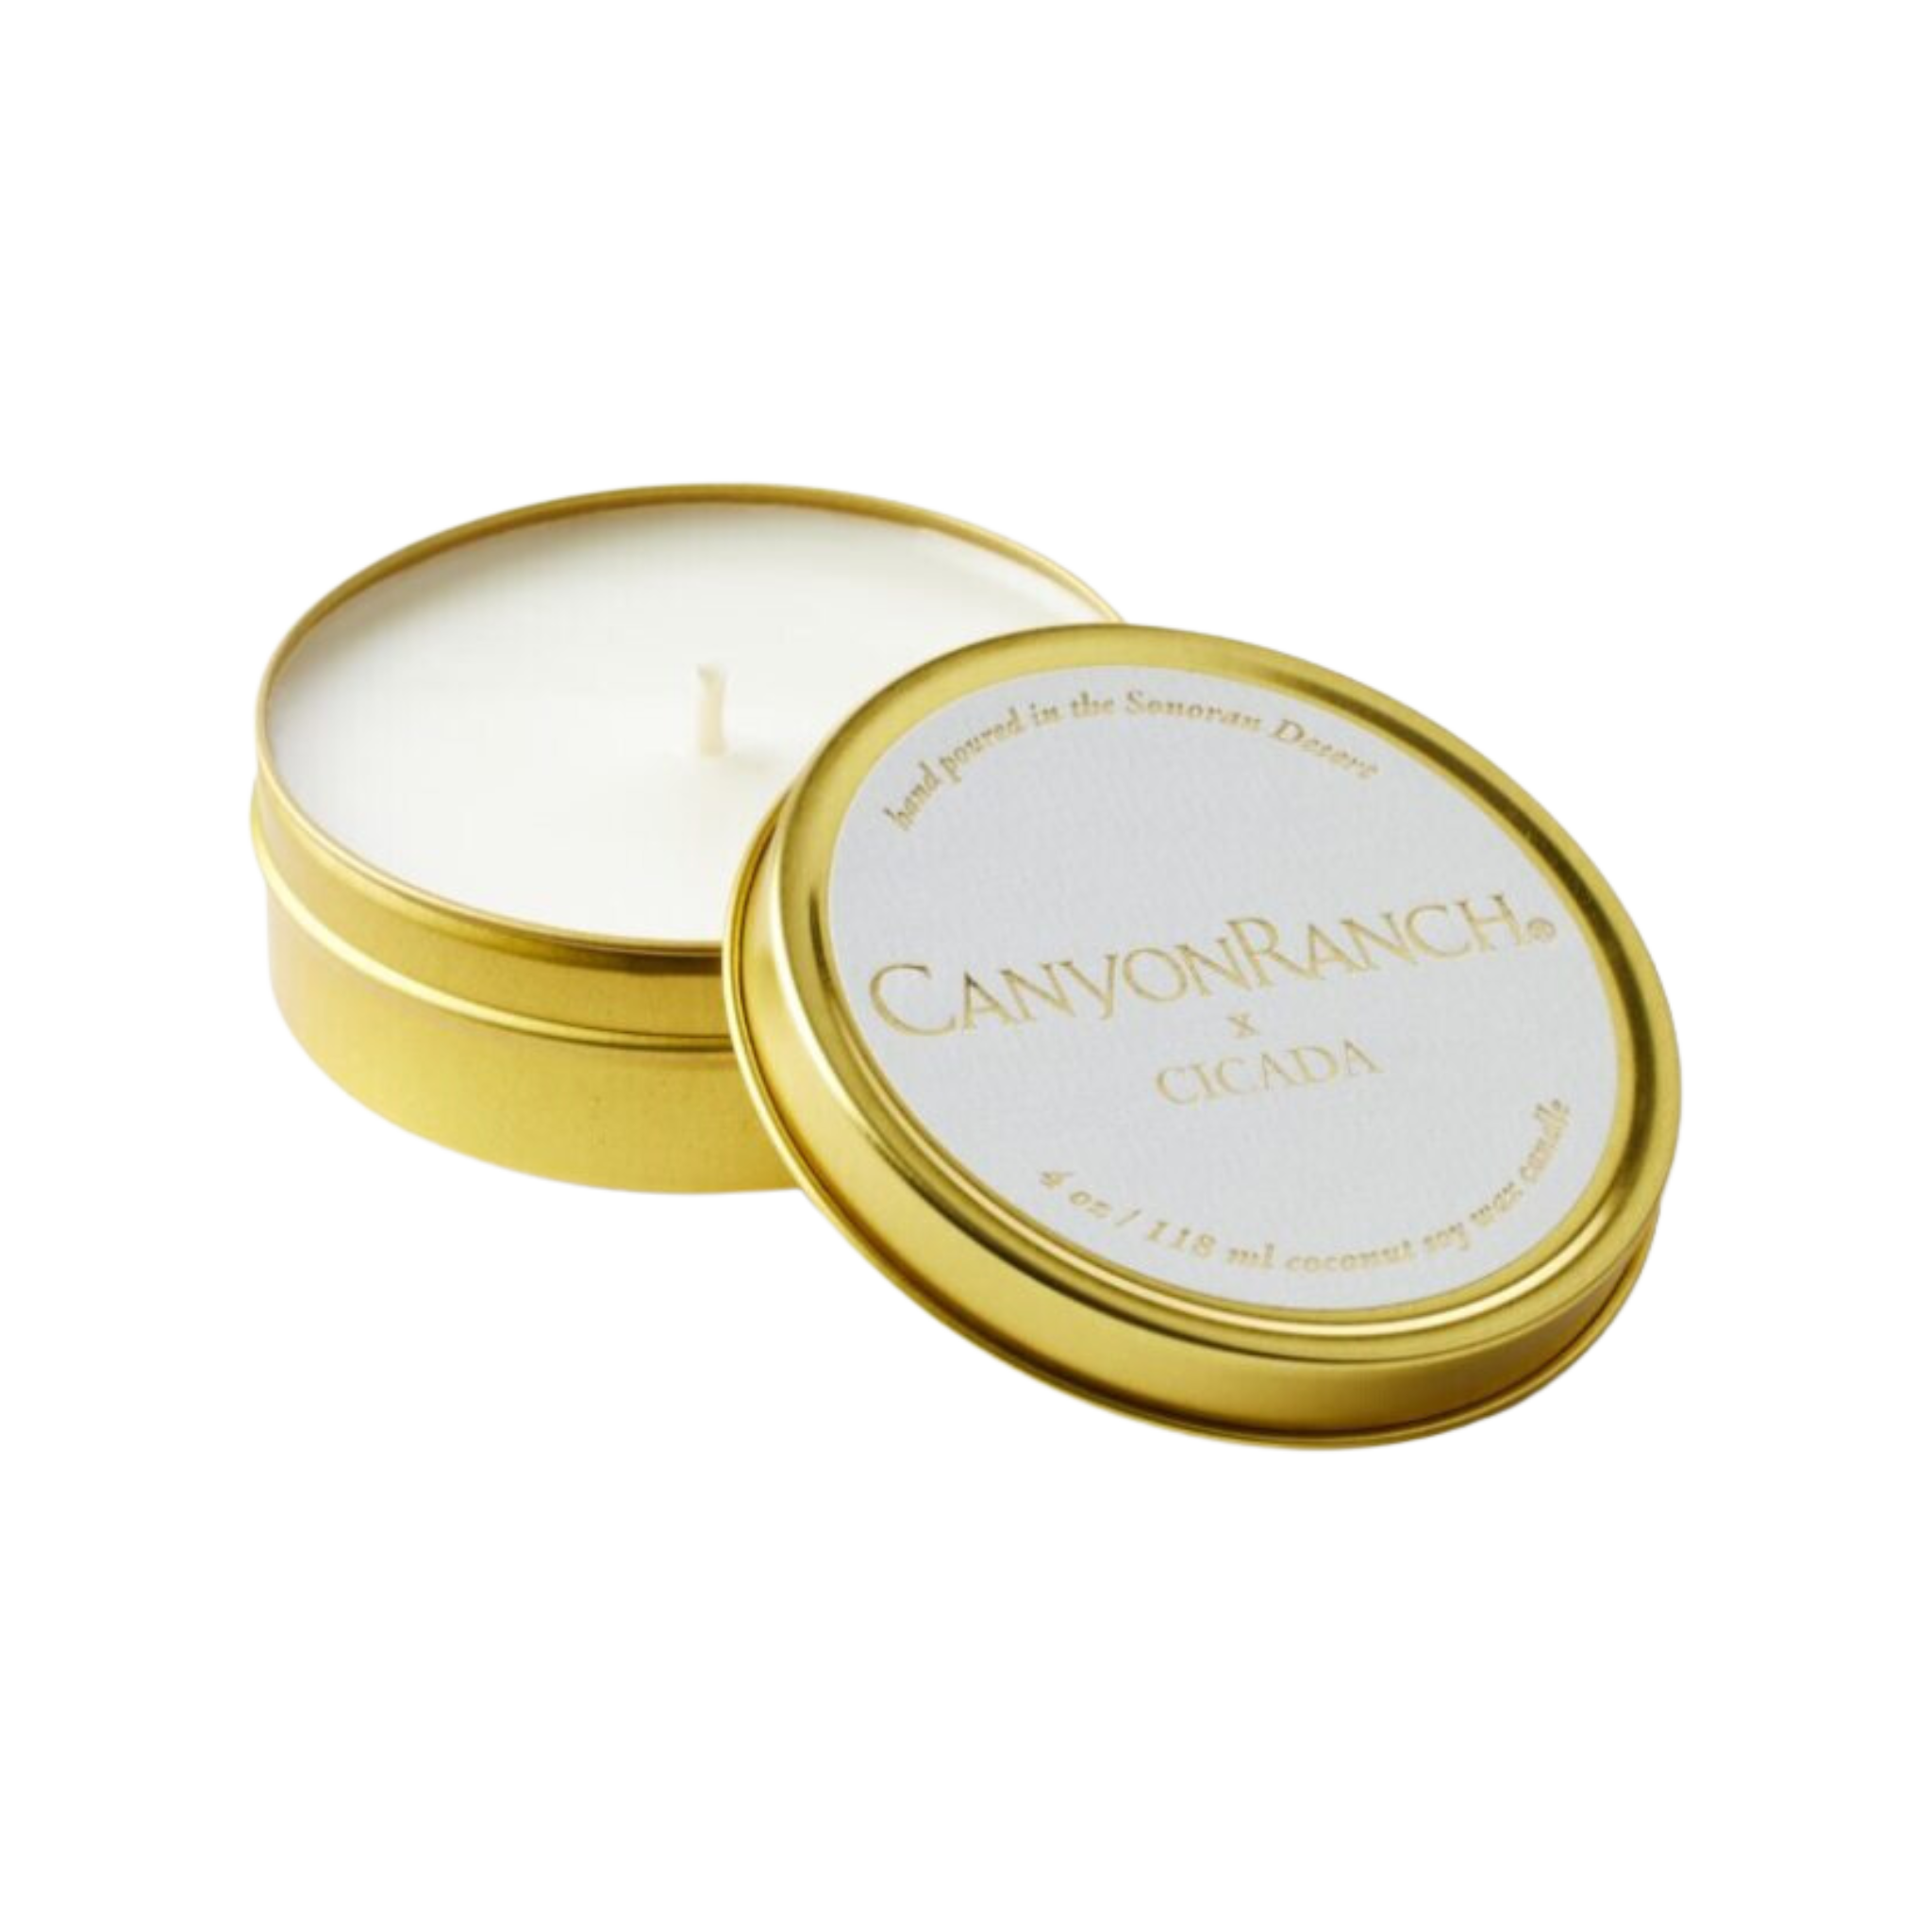 Canyon Ranch Travel Candle